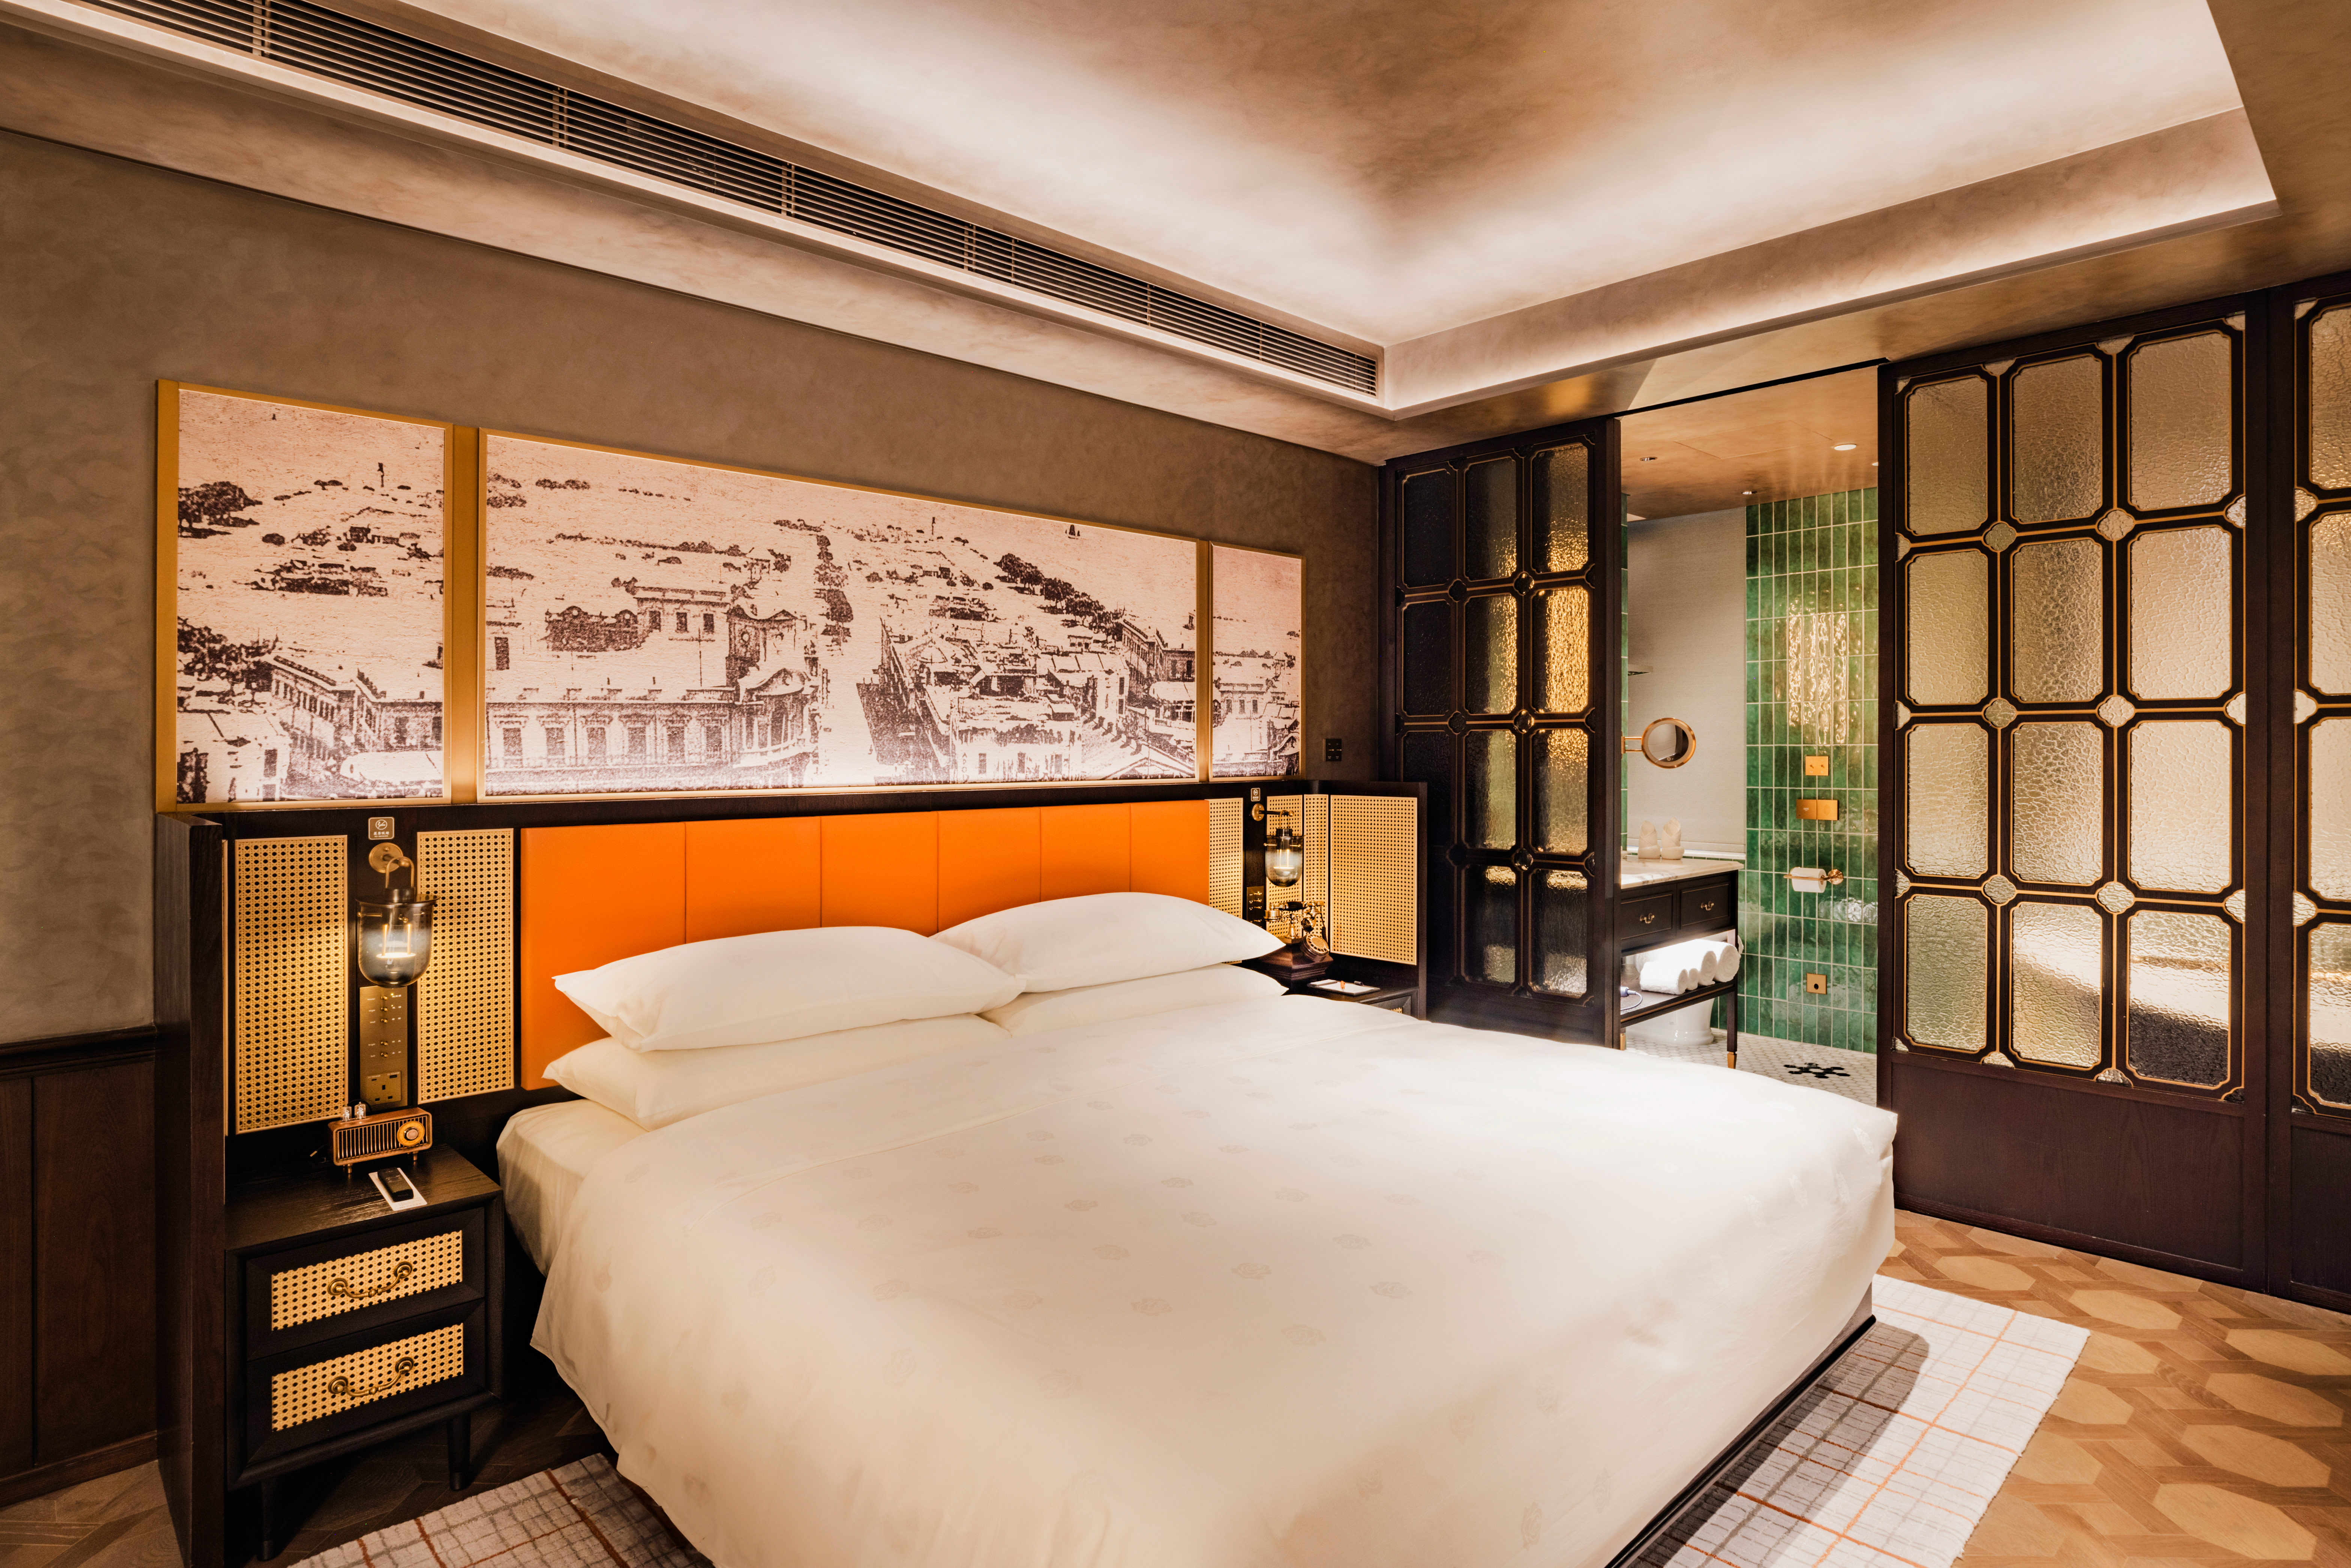 P003 The interior design of Hotel Central led by the Internationally renowned Cheng Chung Design